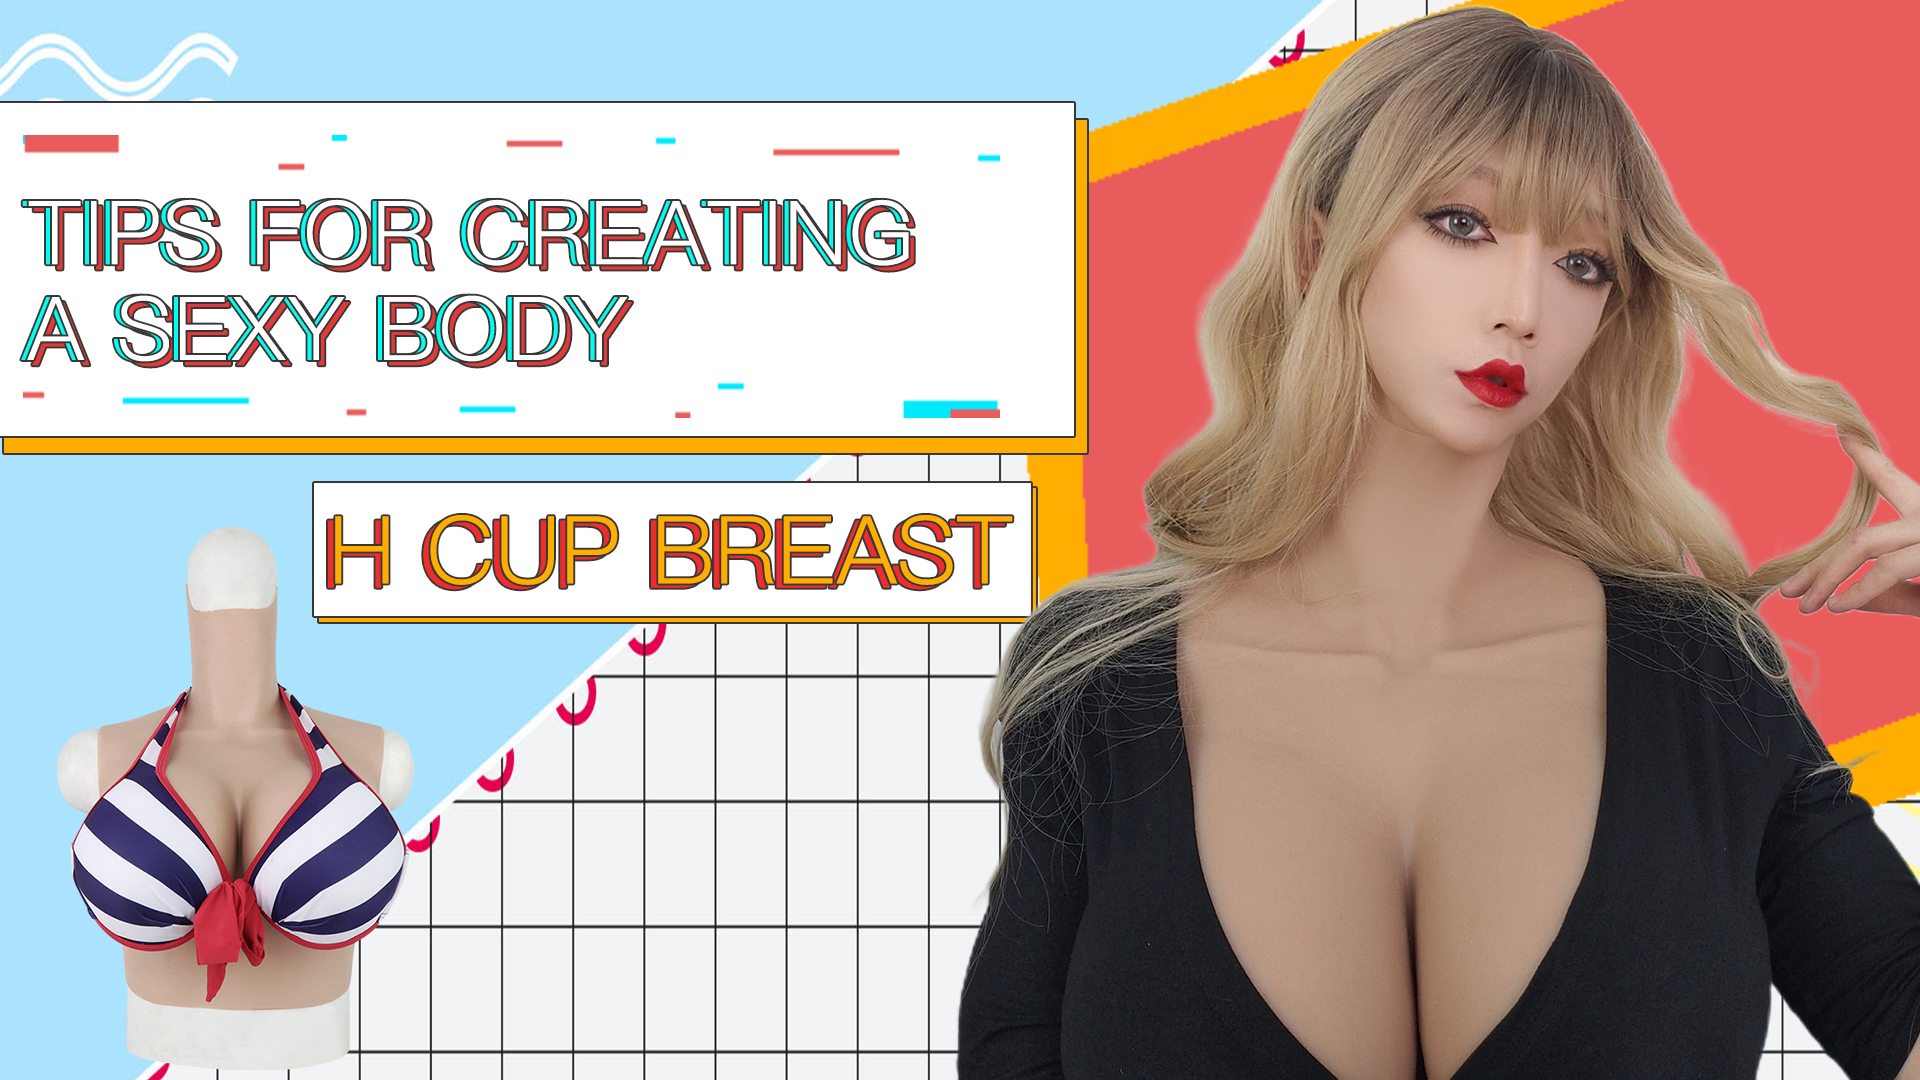 ROANYER on X: 【Tips for creating a sexy body：H cup breast 】If